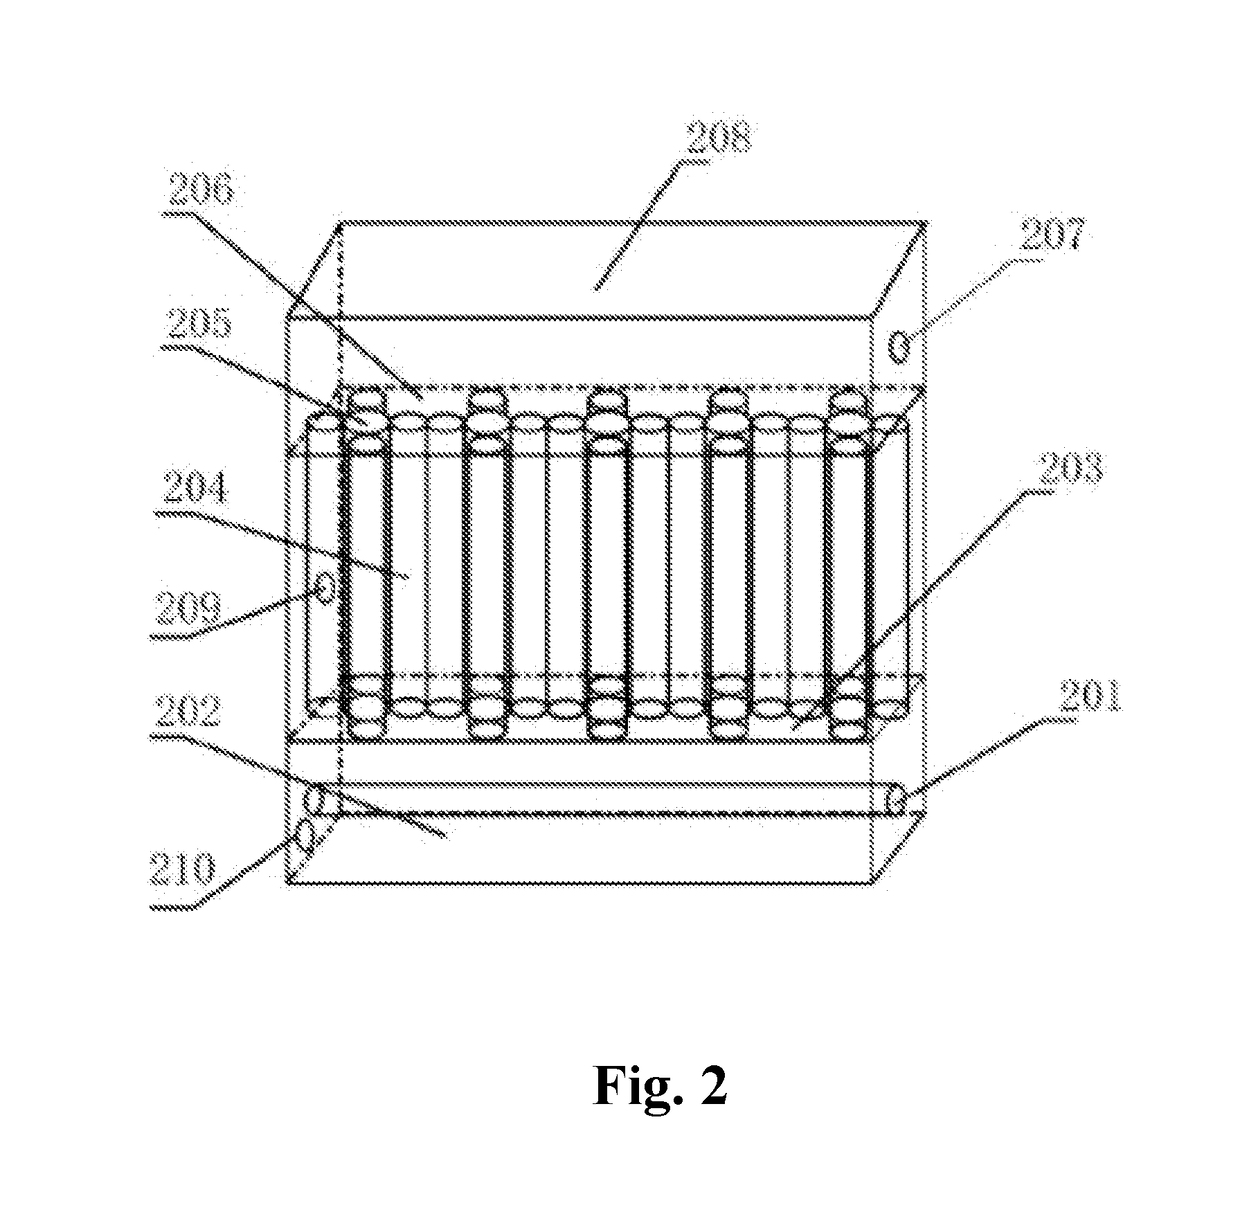 System for Anhydrous Boiling, Bleaching and Dyeing Using Supercritical Carbon Dioxide Fluid